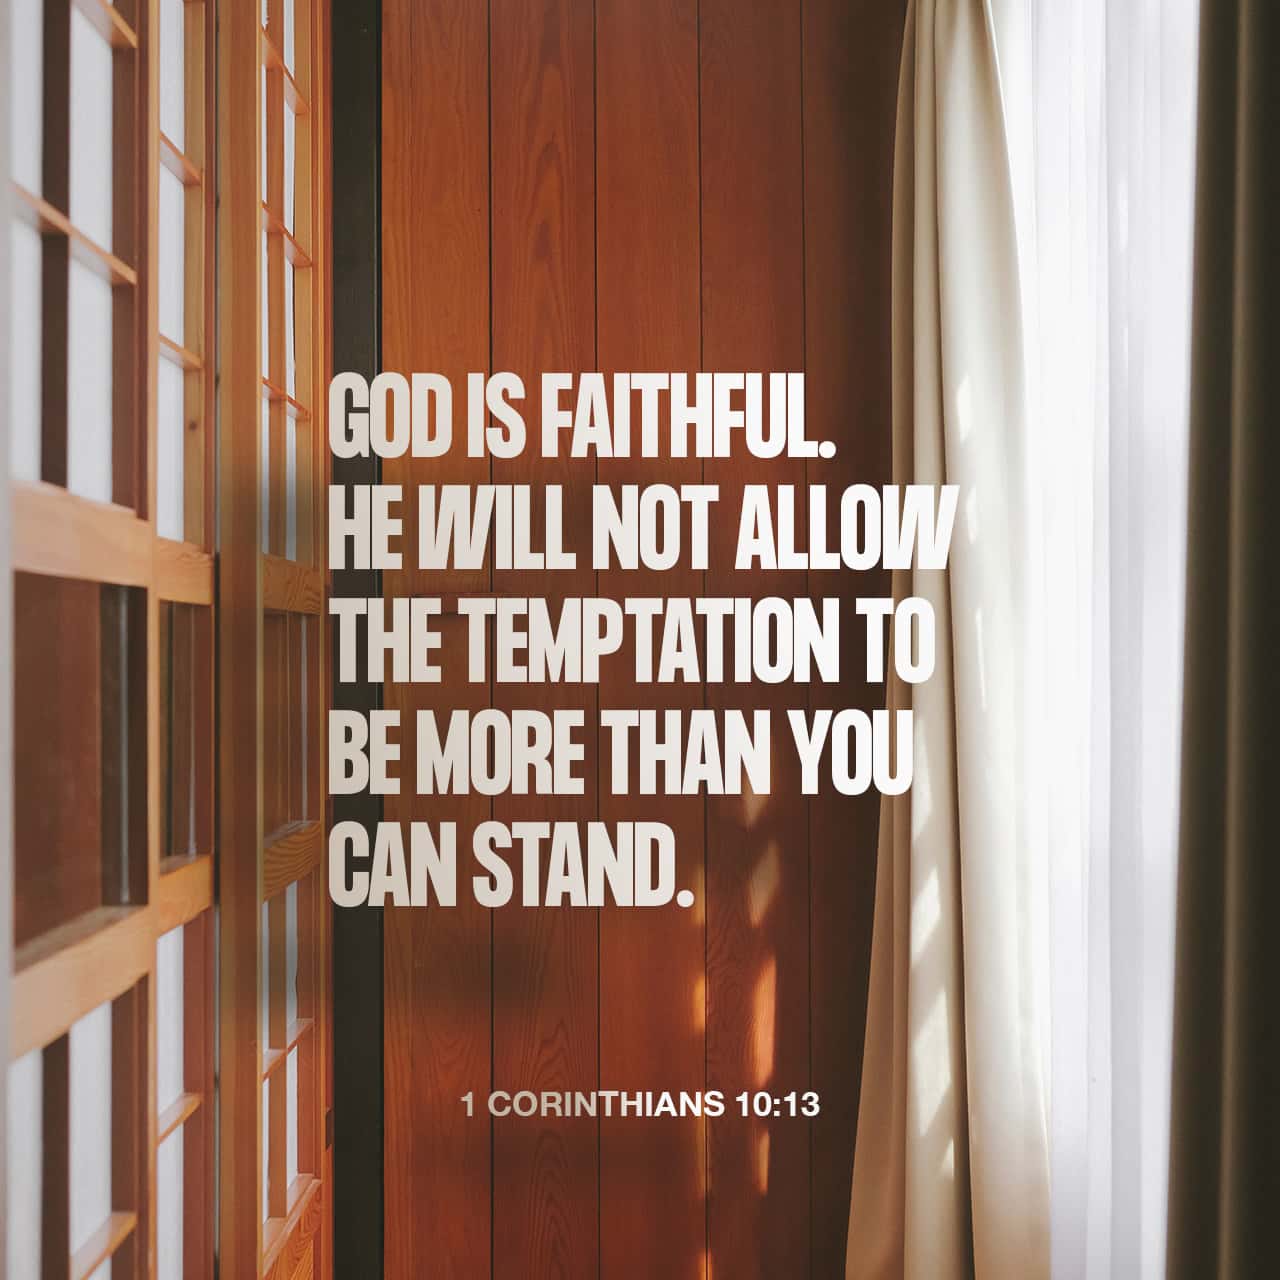 1 Corinthians 10 13 There Hath No Temptation Taken You But Such As Is Common To Man But God Is Faithful Who Will Not Suffer You To Be Tempted Above That Ye Are